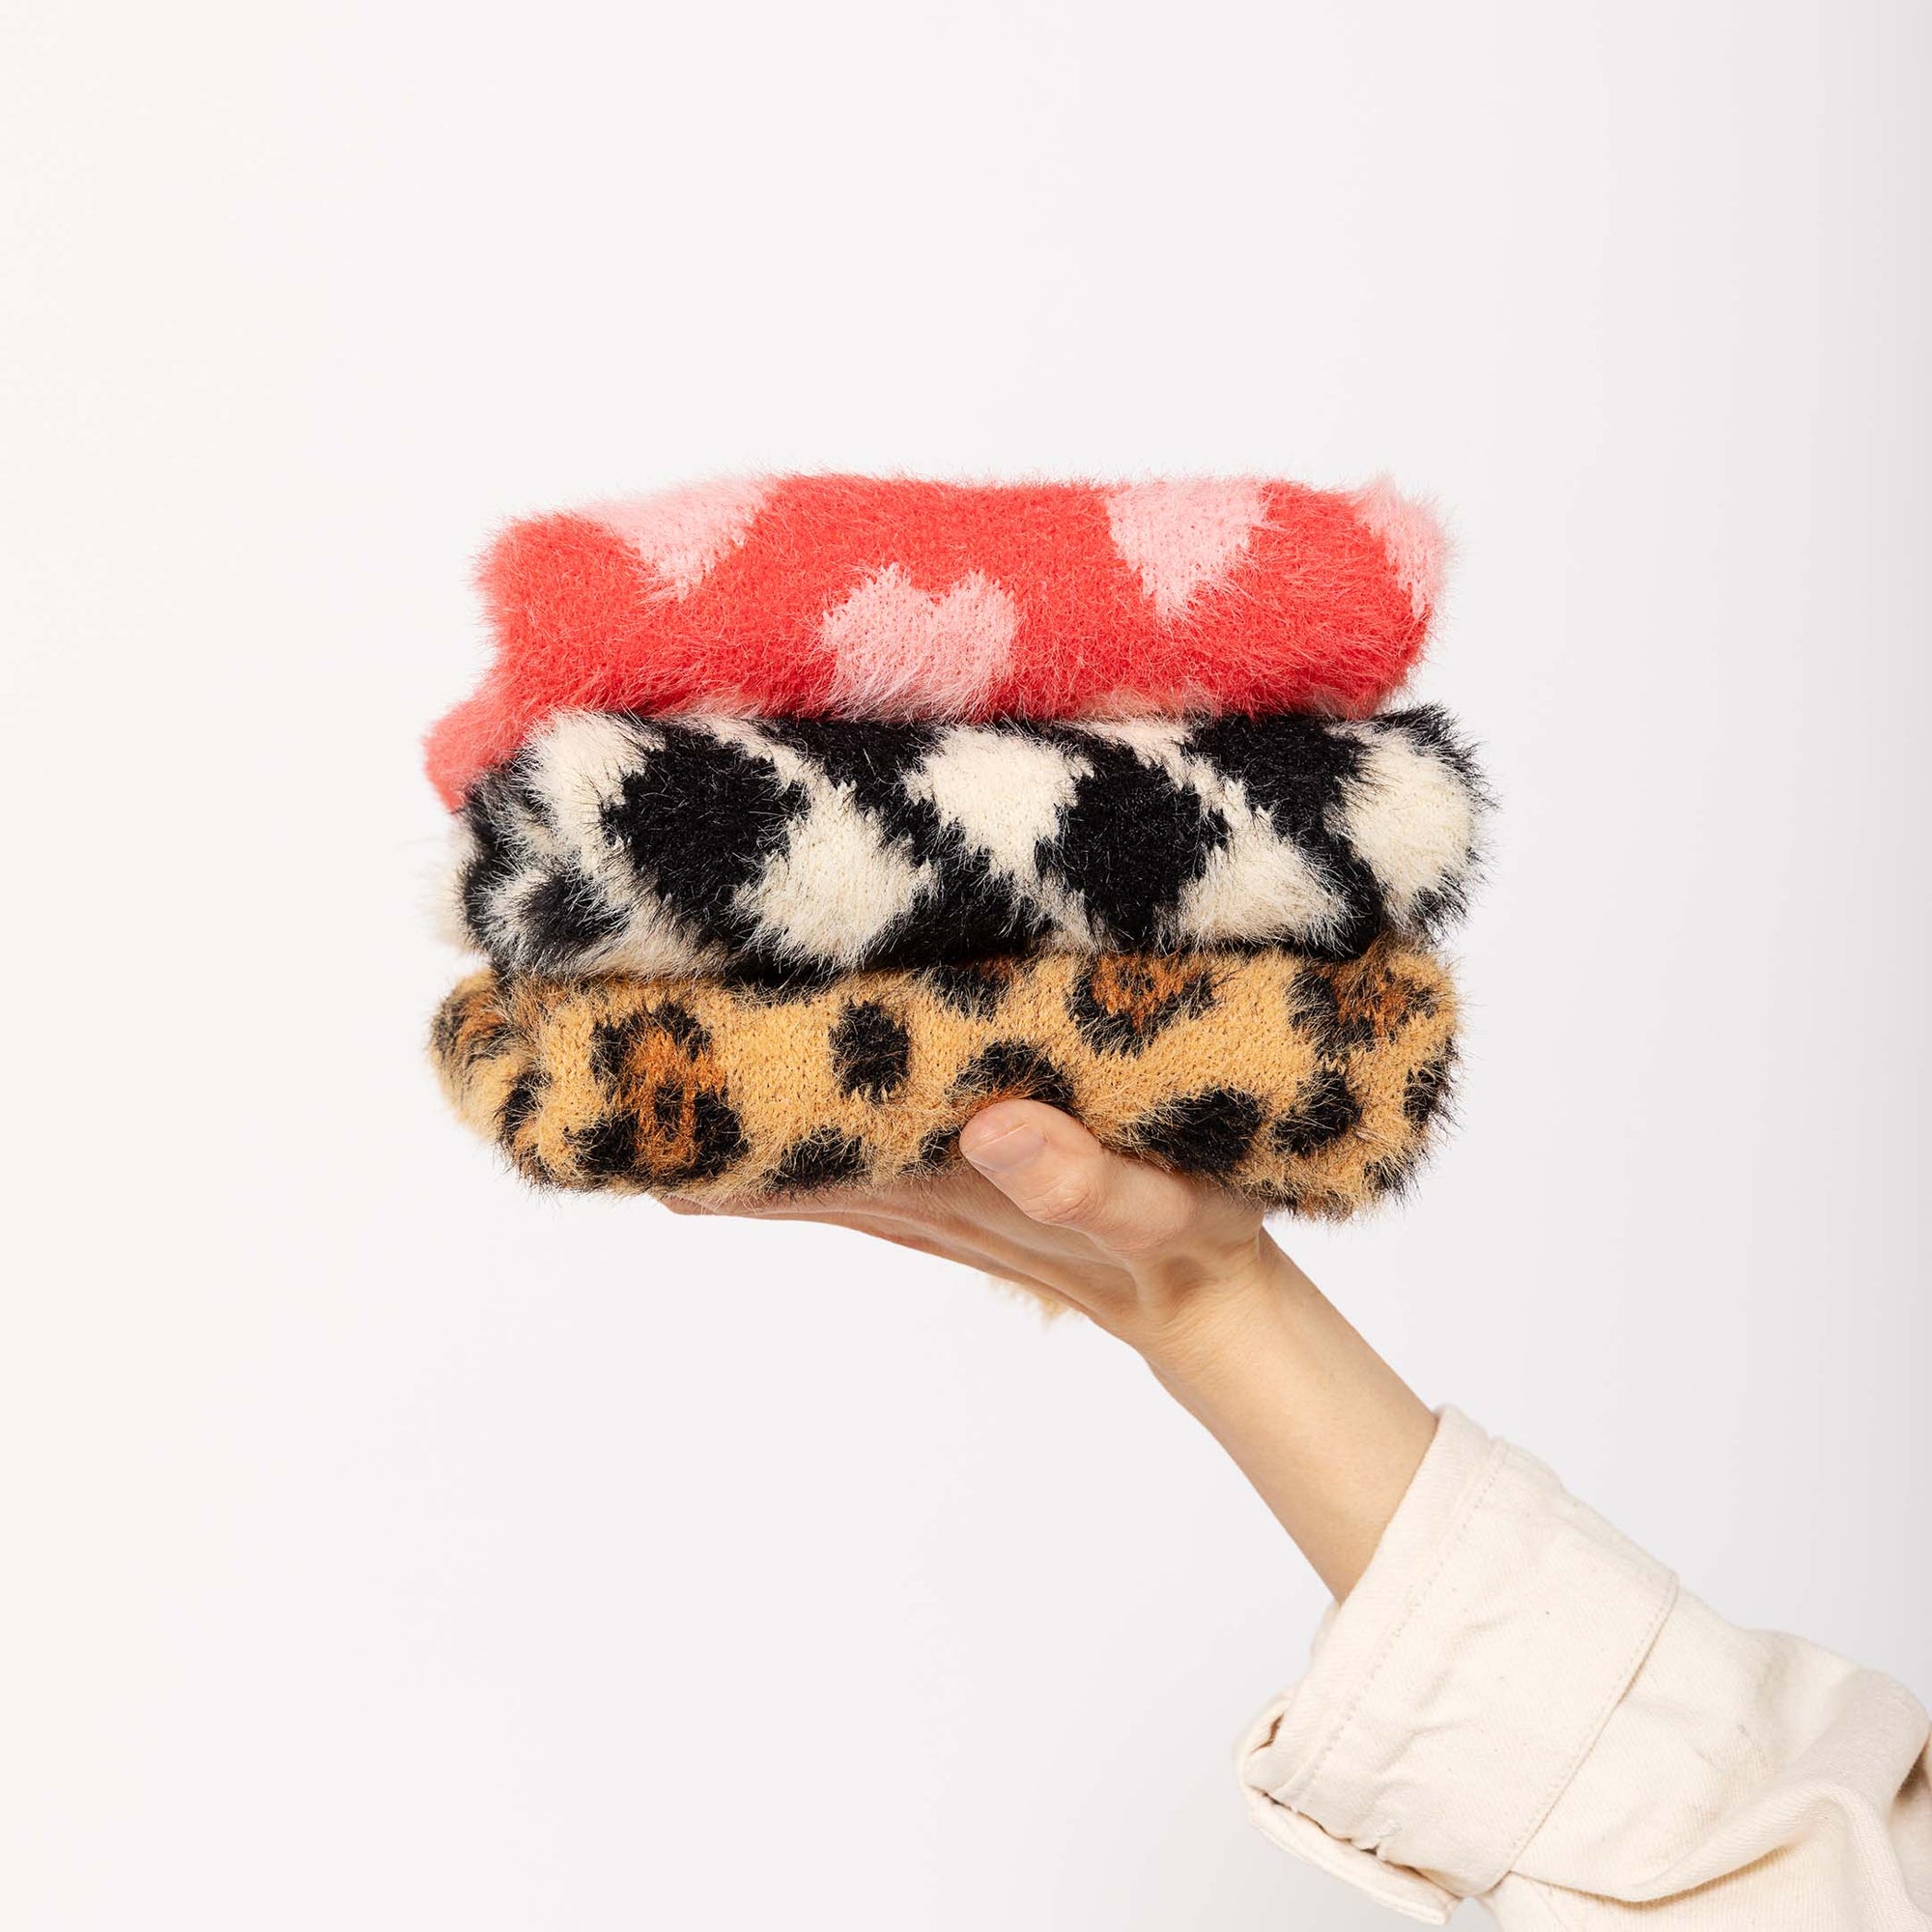 A hand holding a stack of fluffy dog sweaters, with the top one in red with pink hearts and the bottom one in a leopard print, against a white background.